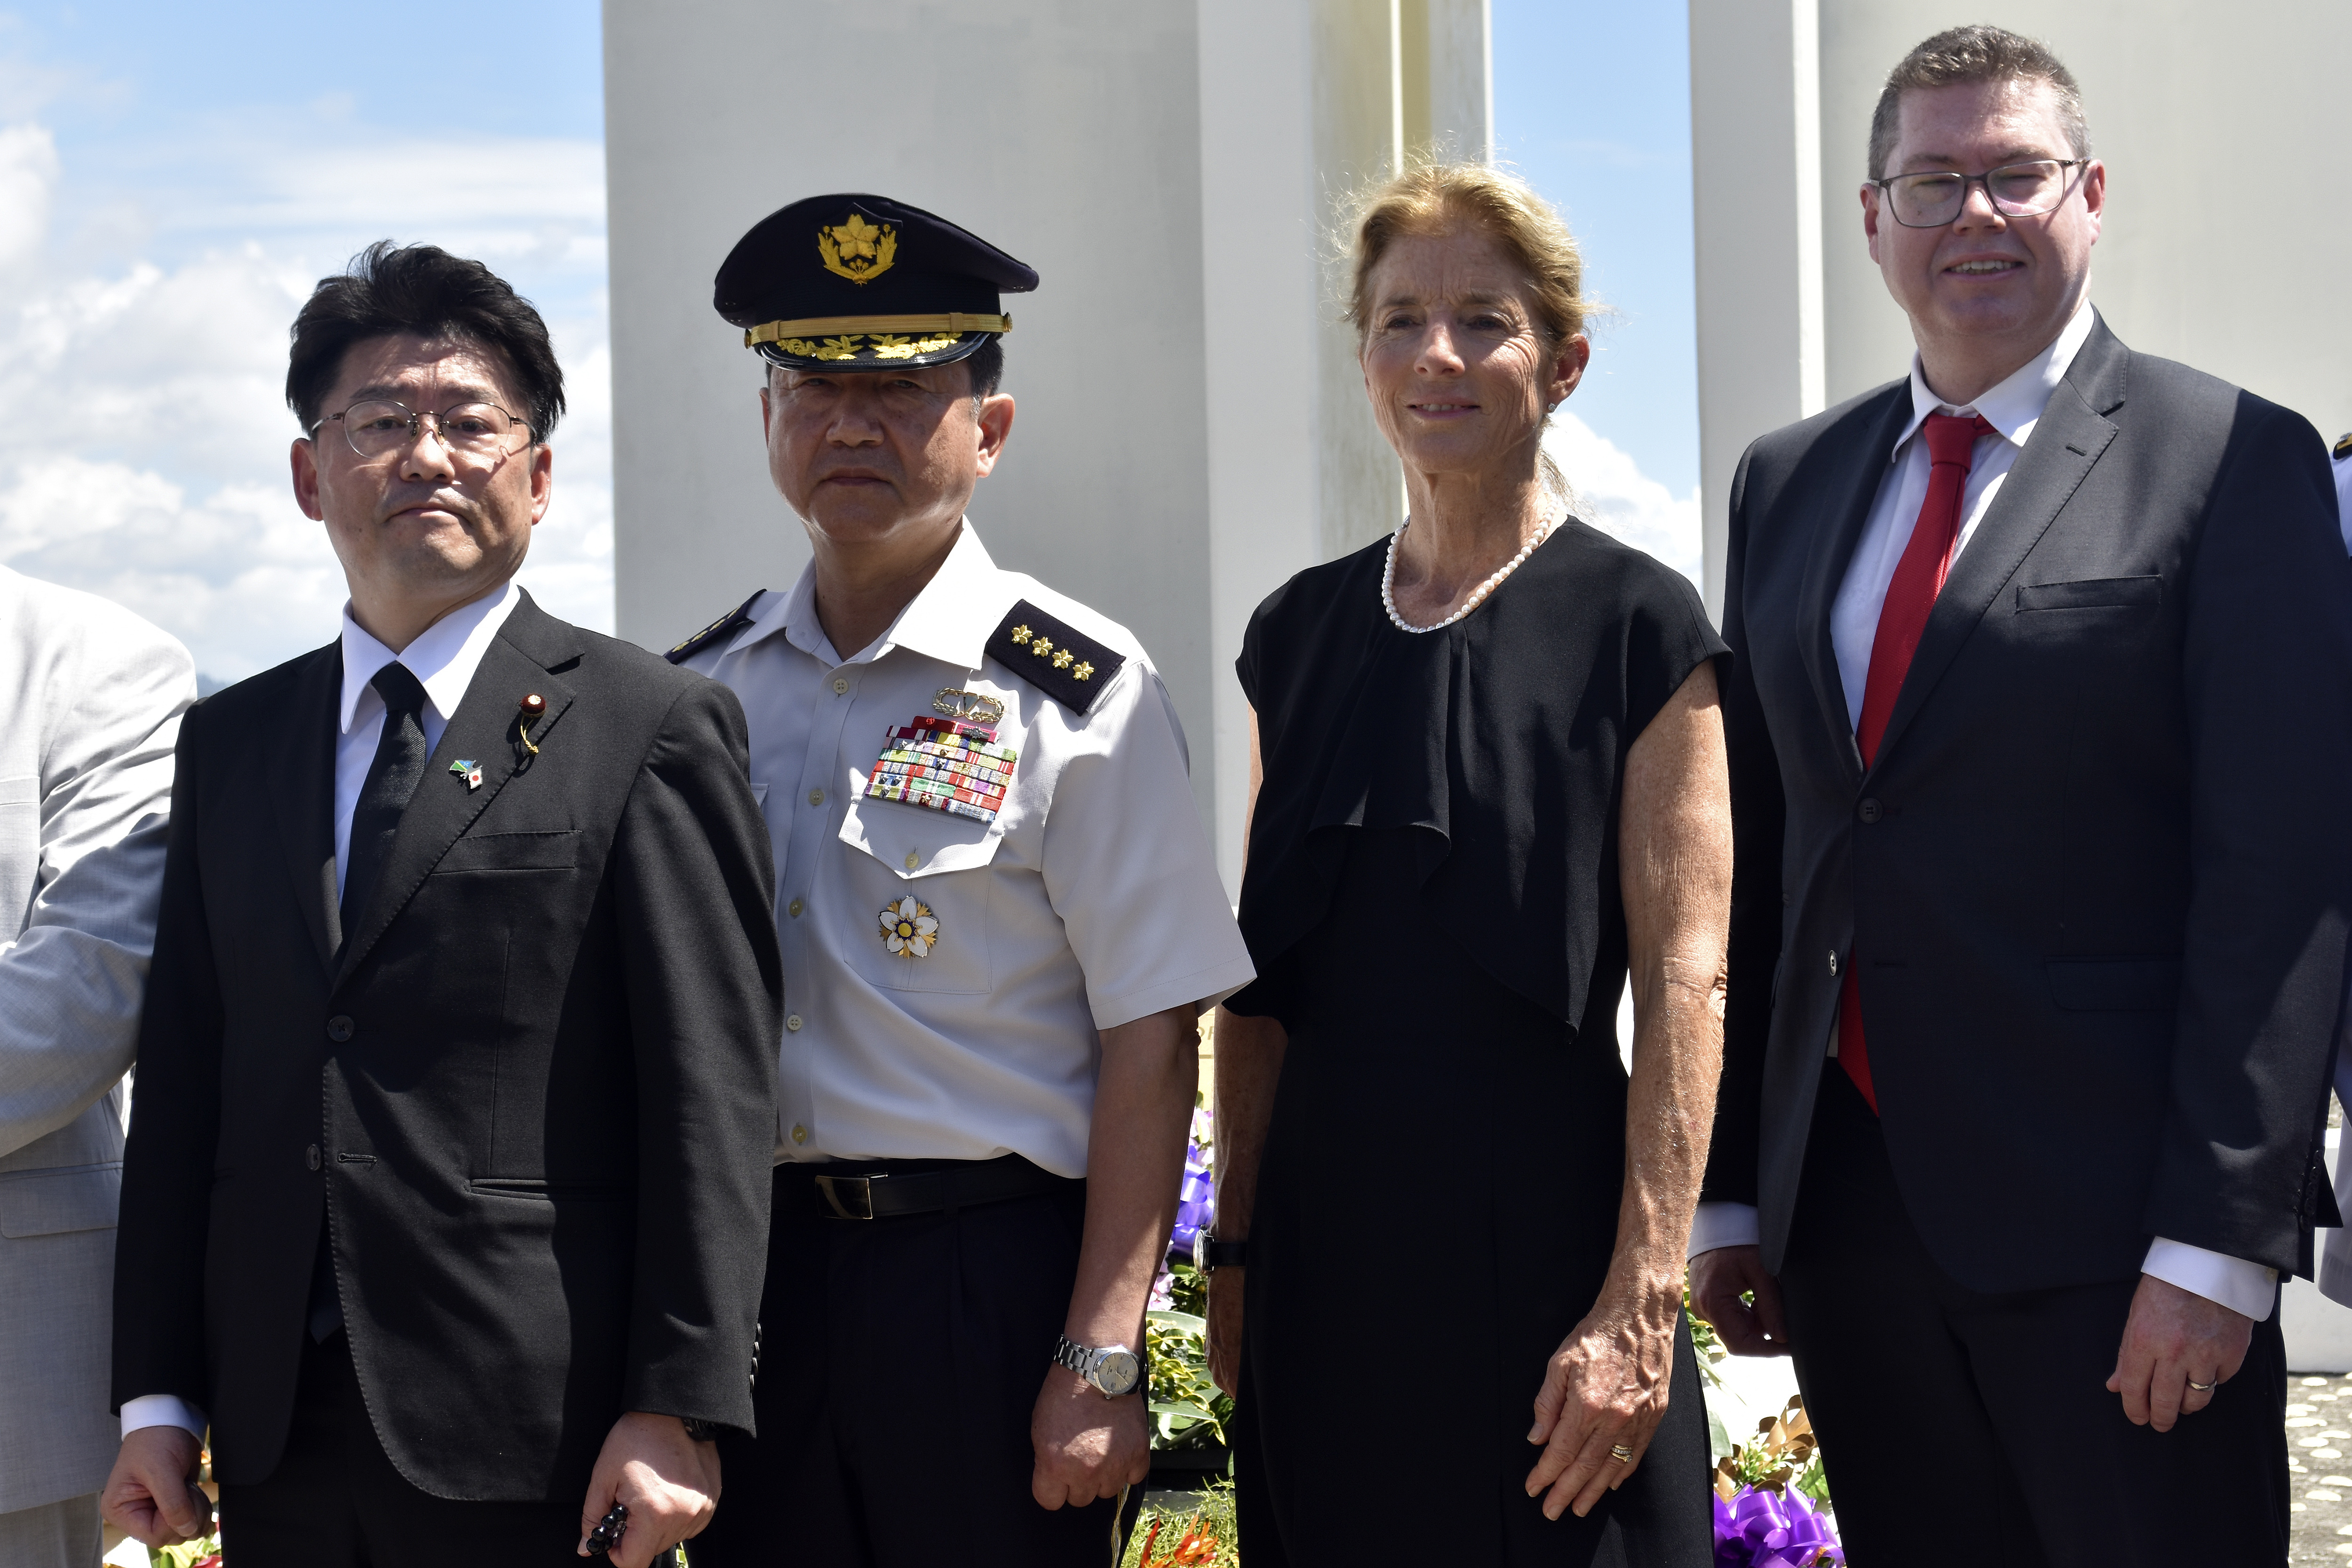 HONIARA, Solomon Islands: (L-R) Japan's State Minister of Defence Makoto Oniki, Japan's Chief of Staff, Joint Staff General Koji Yamazaki, US Ambassador to Australia Caroline Kennedy and Australian Minister for International Development and the Pacific, and the Minister for Defence Industry, Pat Conroy pose for pictures during a ceremony marking the 80th anniversary of the Battle of Guadalcanal at Skyline Ridge in Honiara on the Solomon Islands on August 7, 2022. — AFP